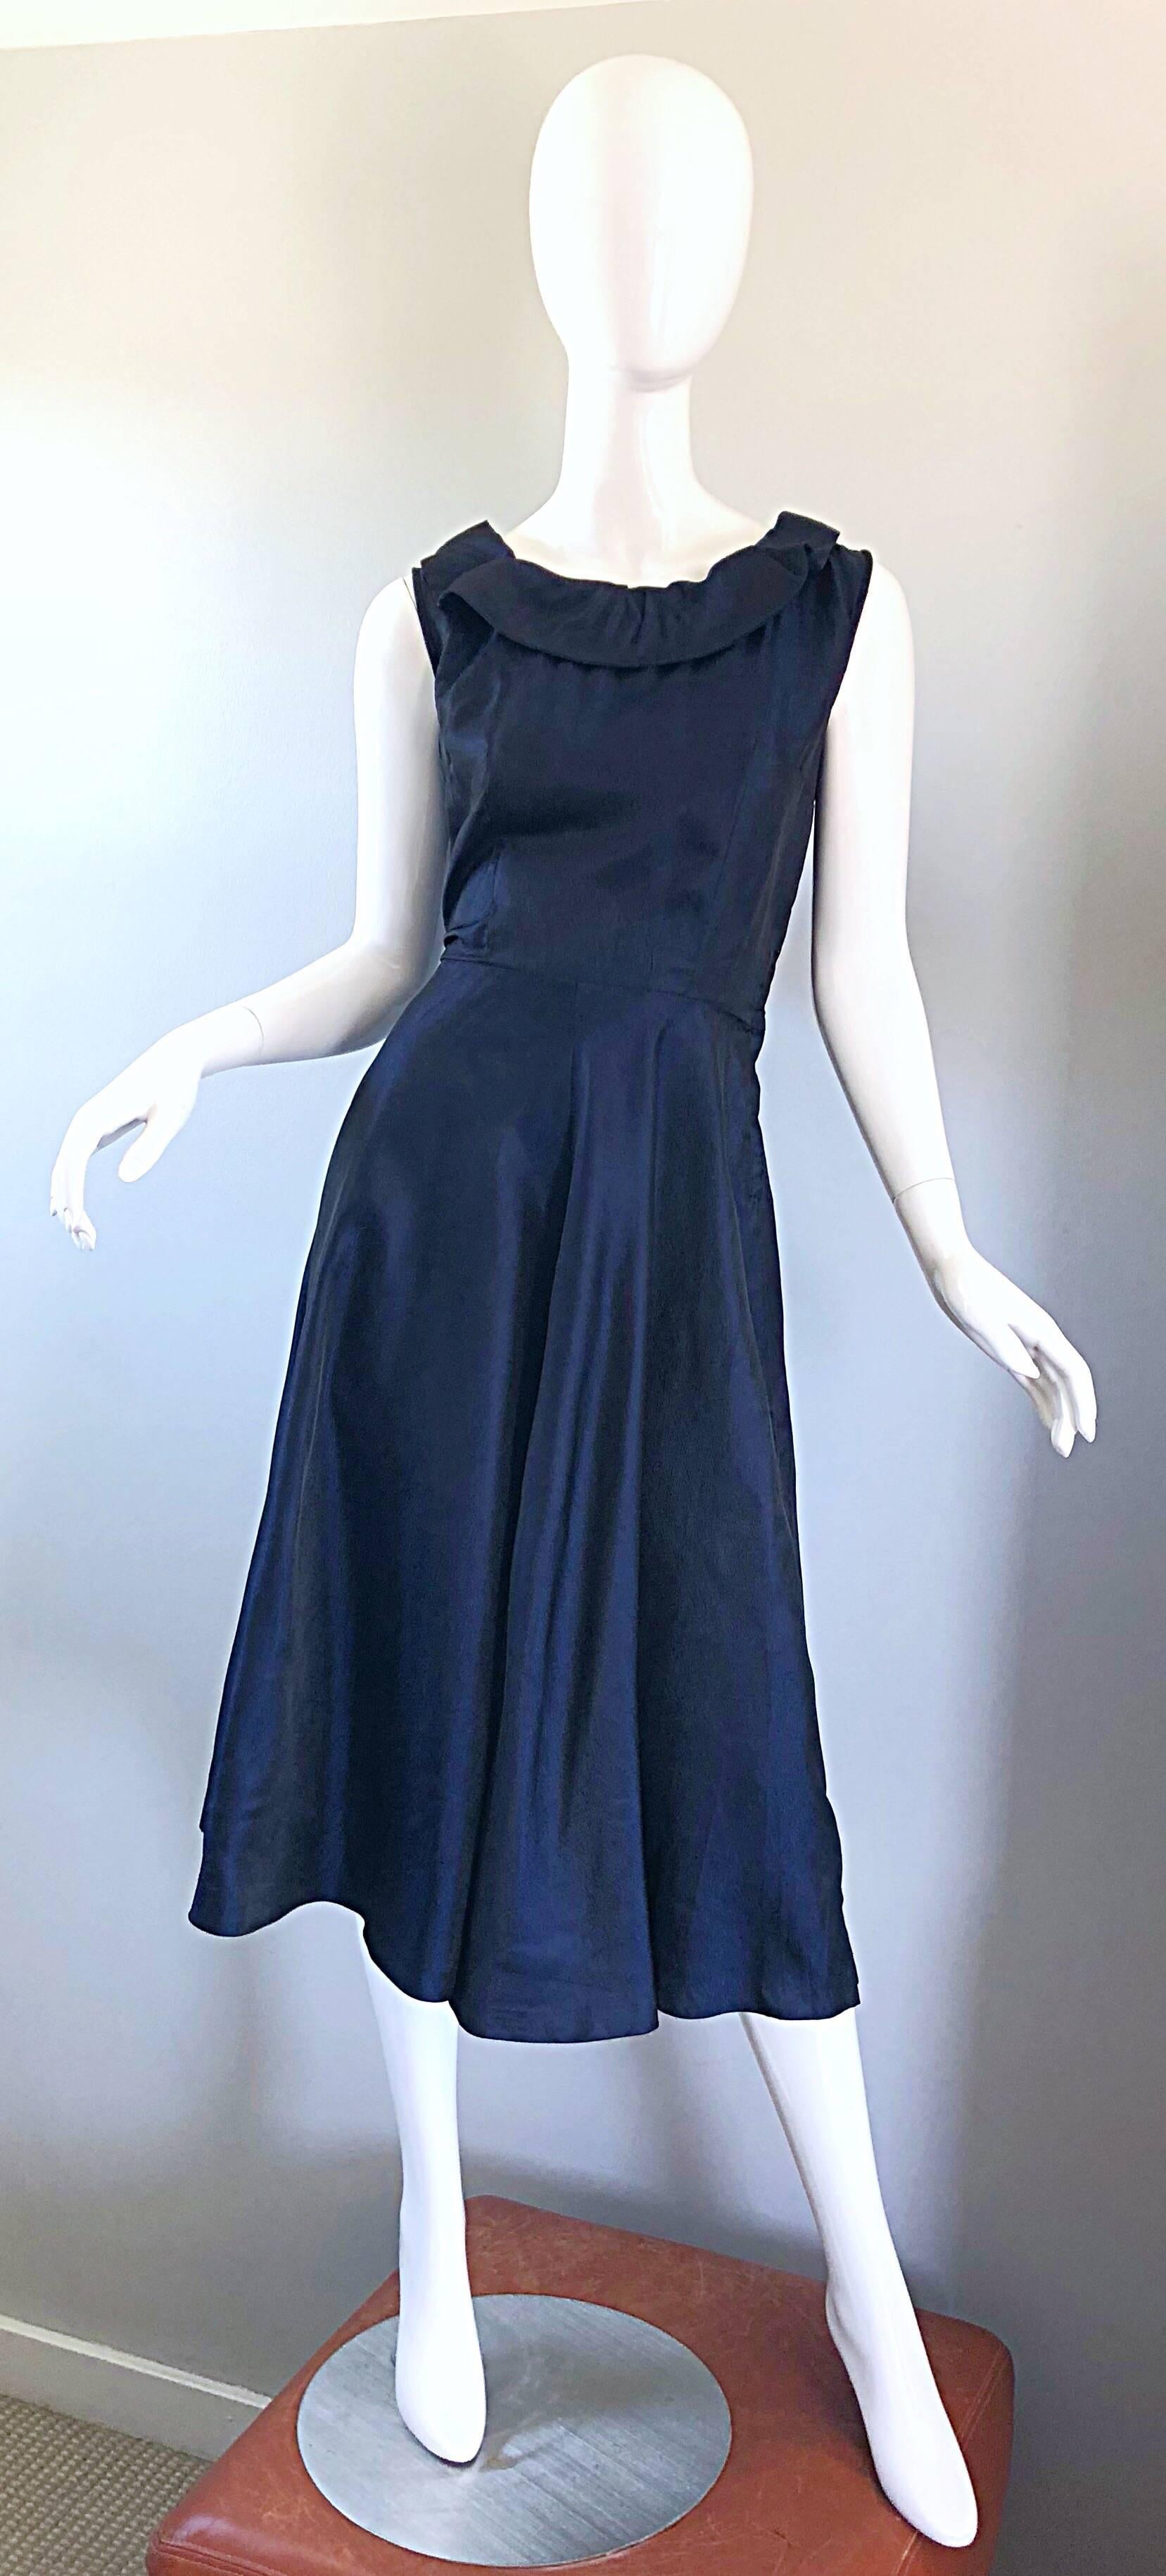 Beautiful 1950s navy blue silk dress! Features a fitted bodice with chic ties at top back neck. Forgiving full skirt. Full metal zipper at the side bodice. Extremely well constructed with a heavy eye to detail. Great belted or alone for any day or